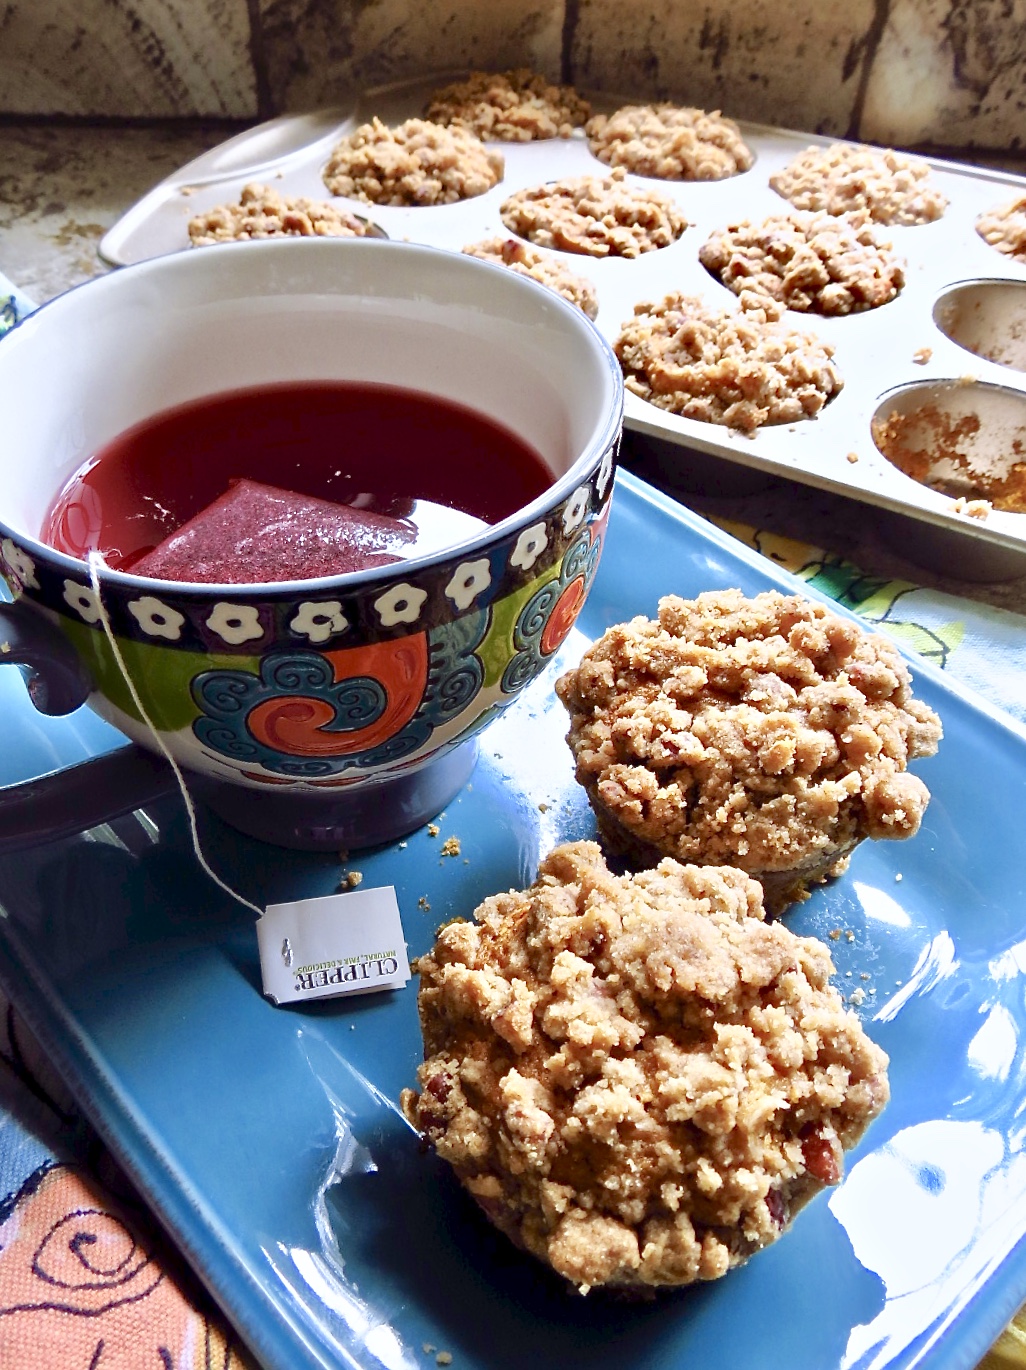 Two Pumpkin Muffins With Streusel on a blue plate with a multi-colored cup.